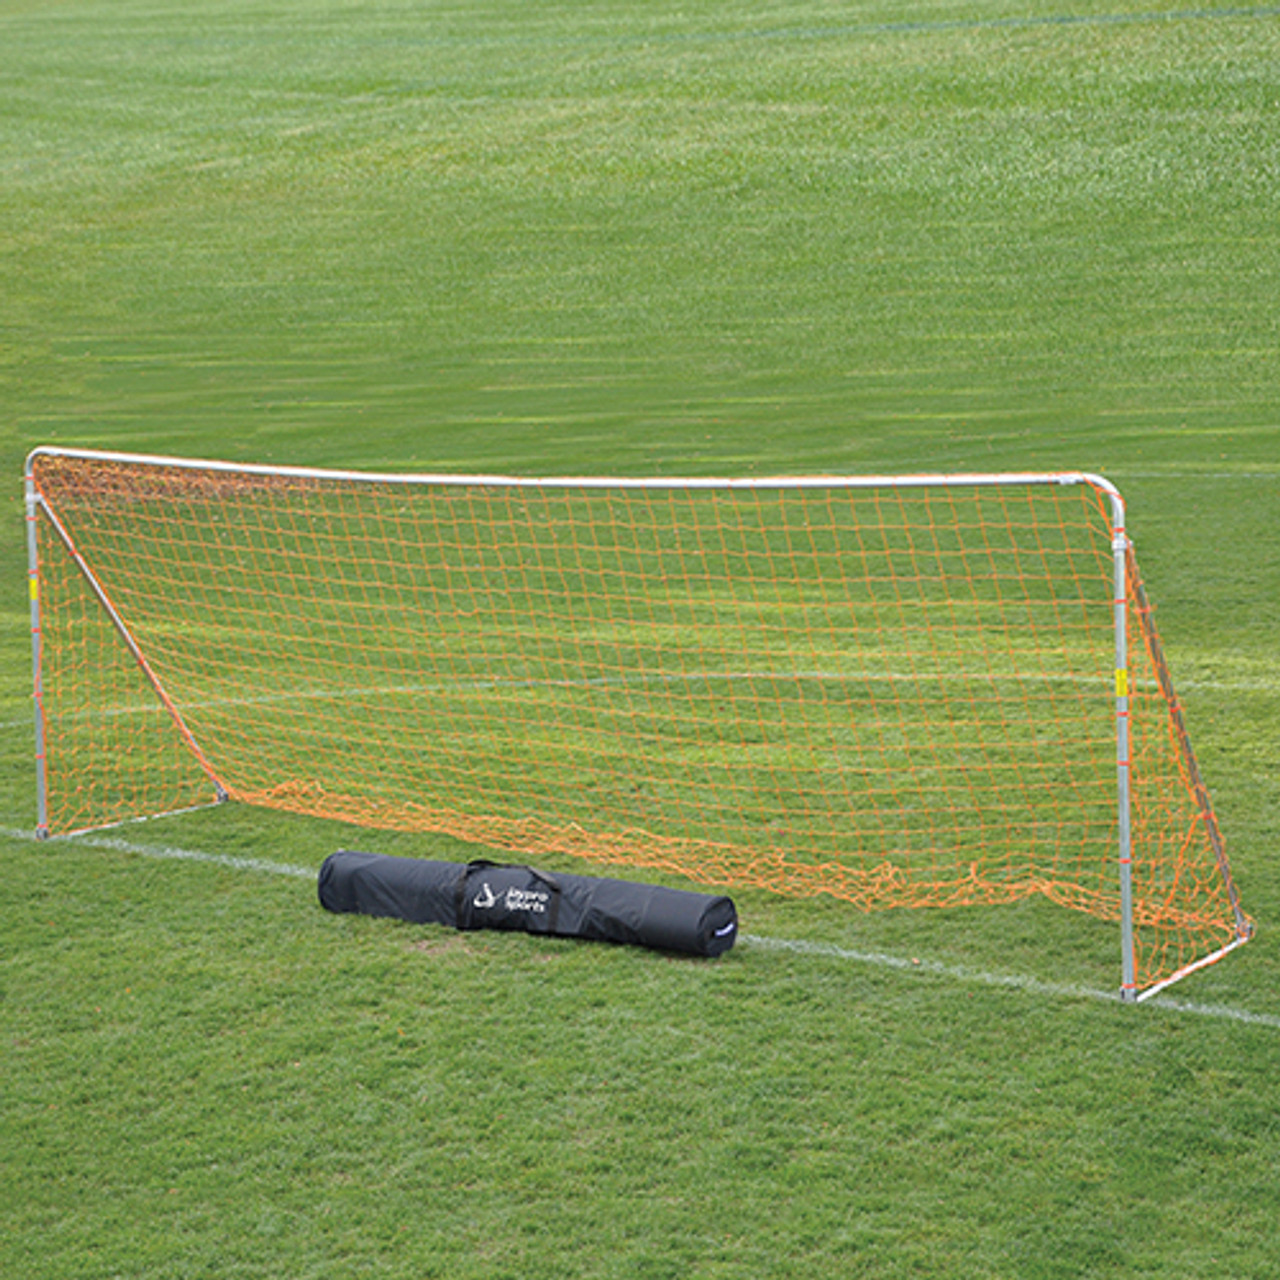 Recreational and Practice Soccer Goals